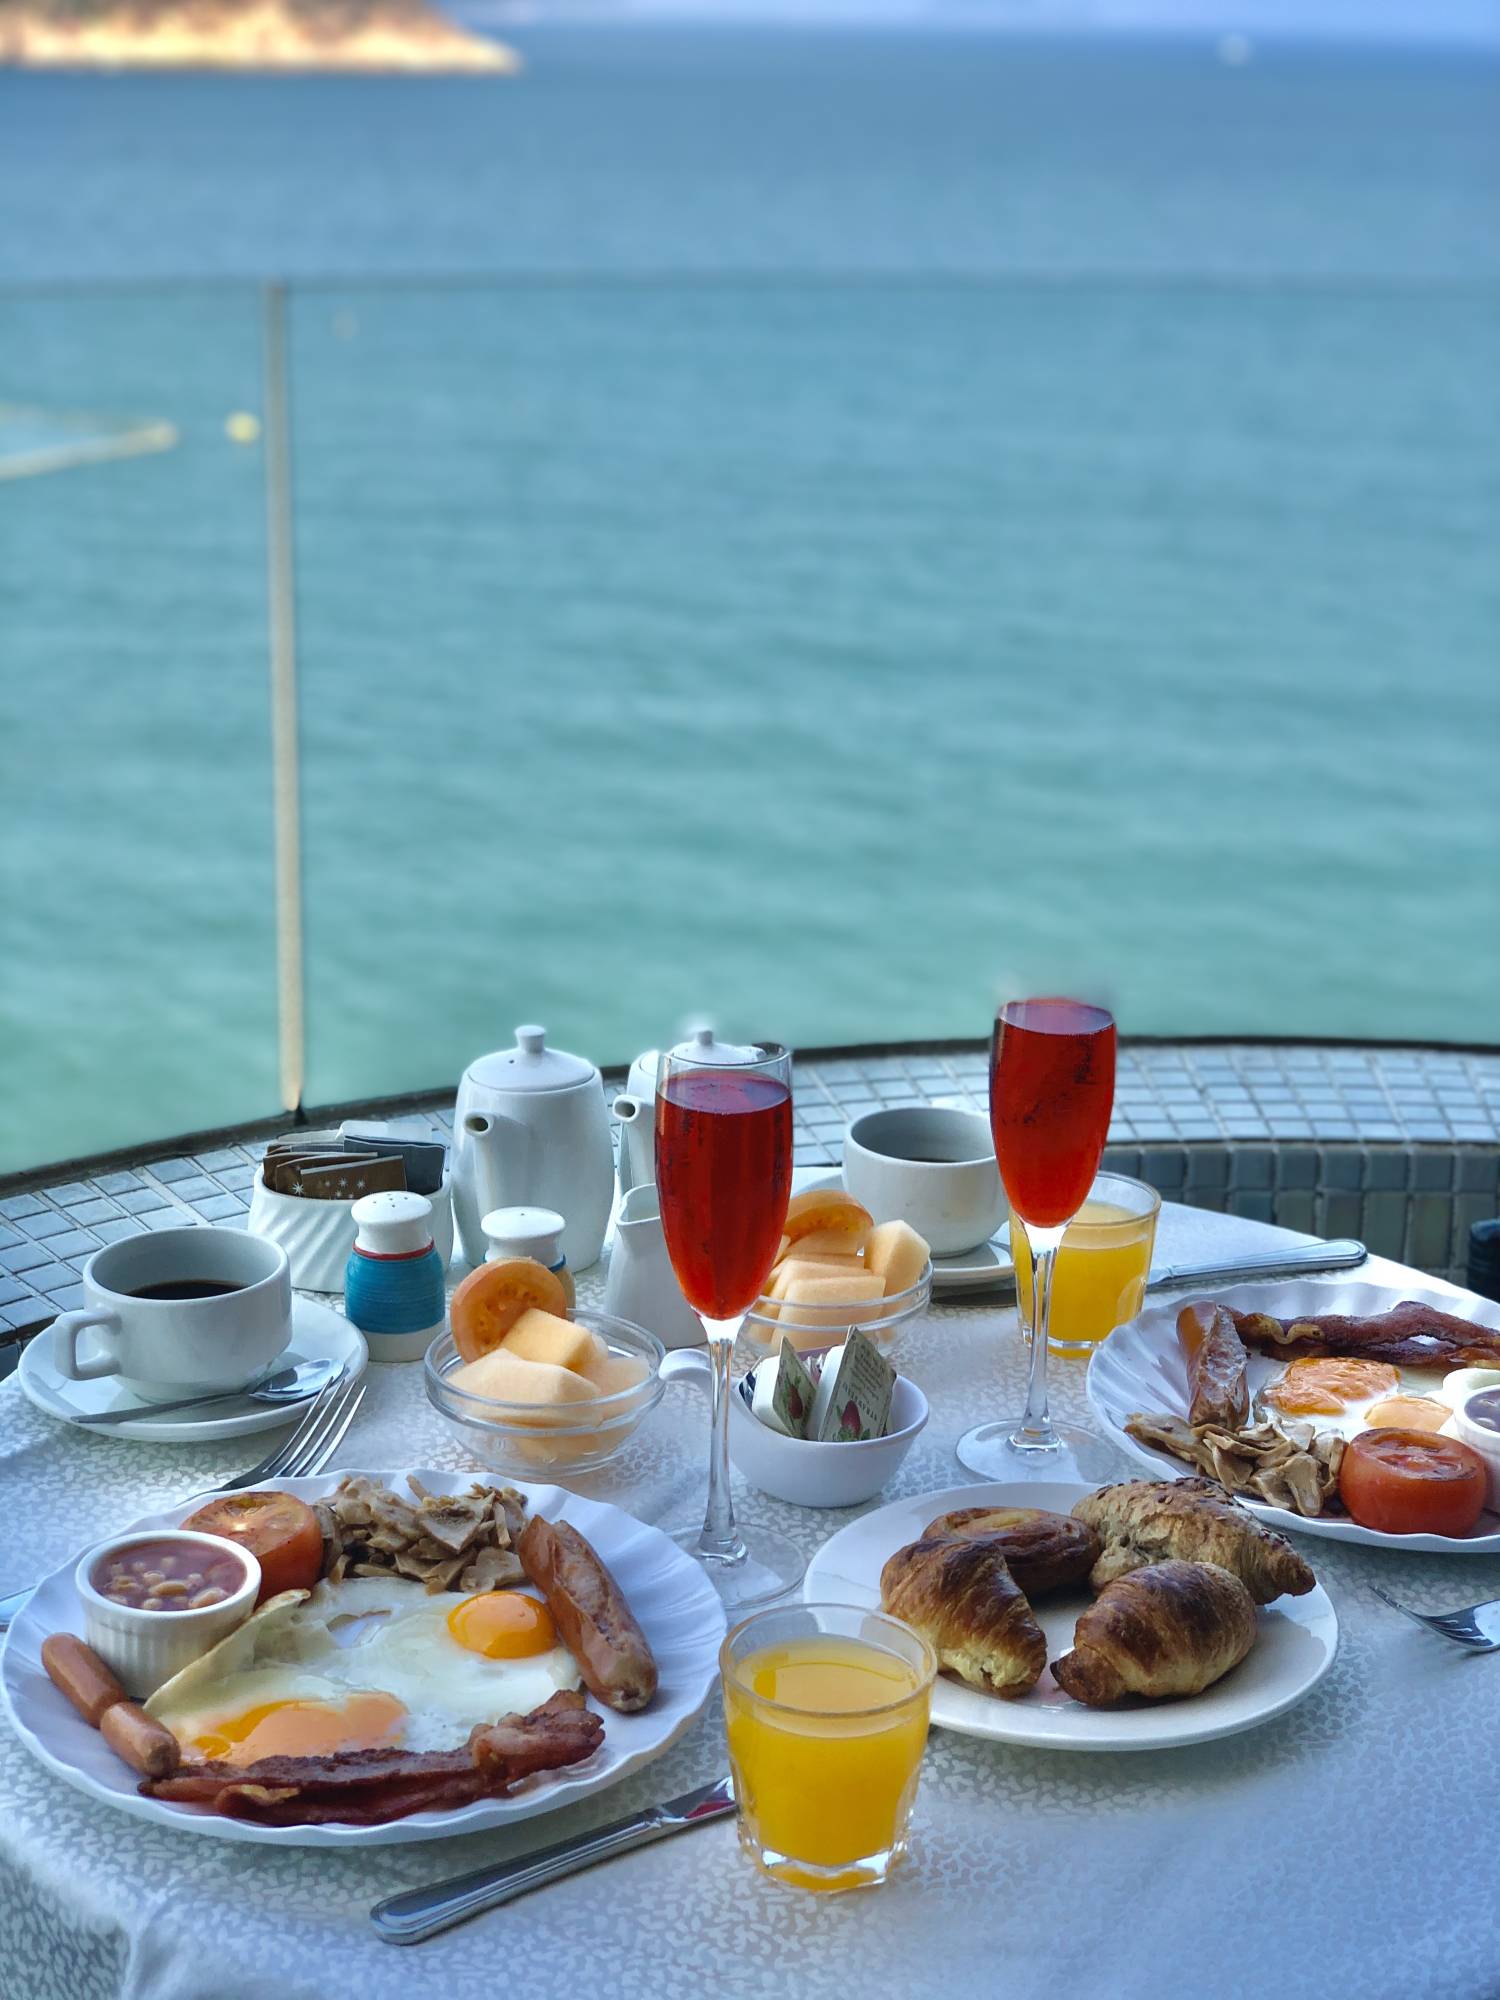 【Happy Summer Staycation】Ocean View Room Accommodation + Seaview Balcony + Breakfast + Seafood Dinner｜ The Warwick Hotel